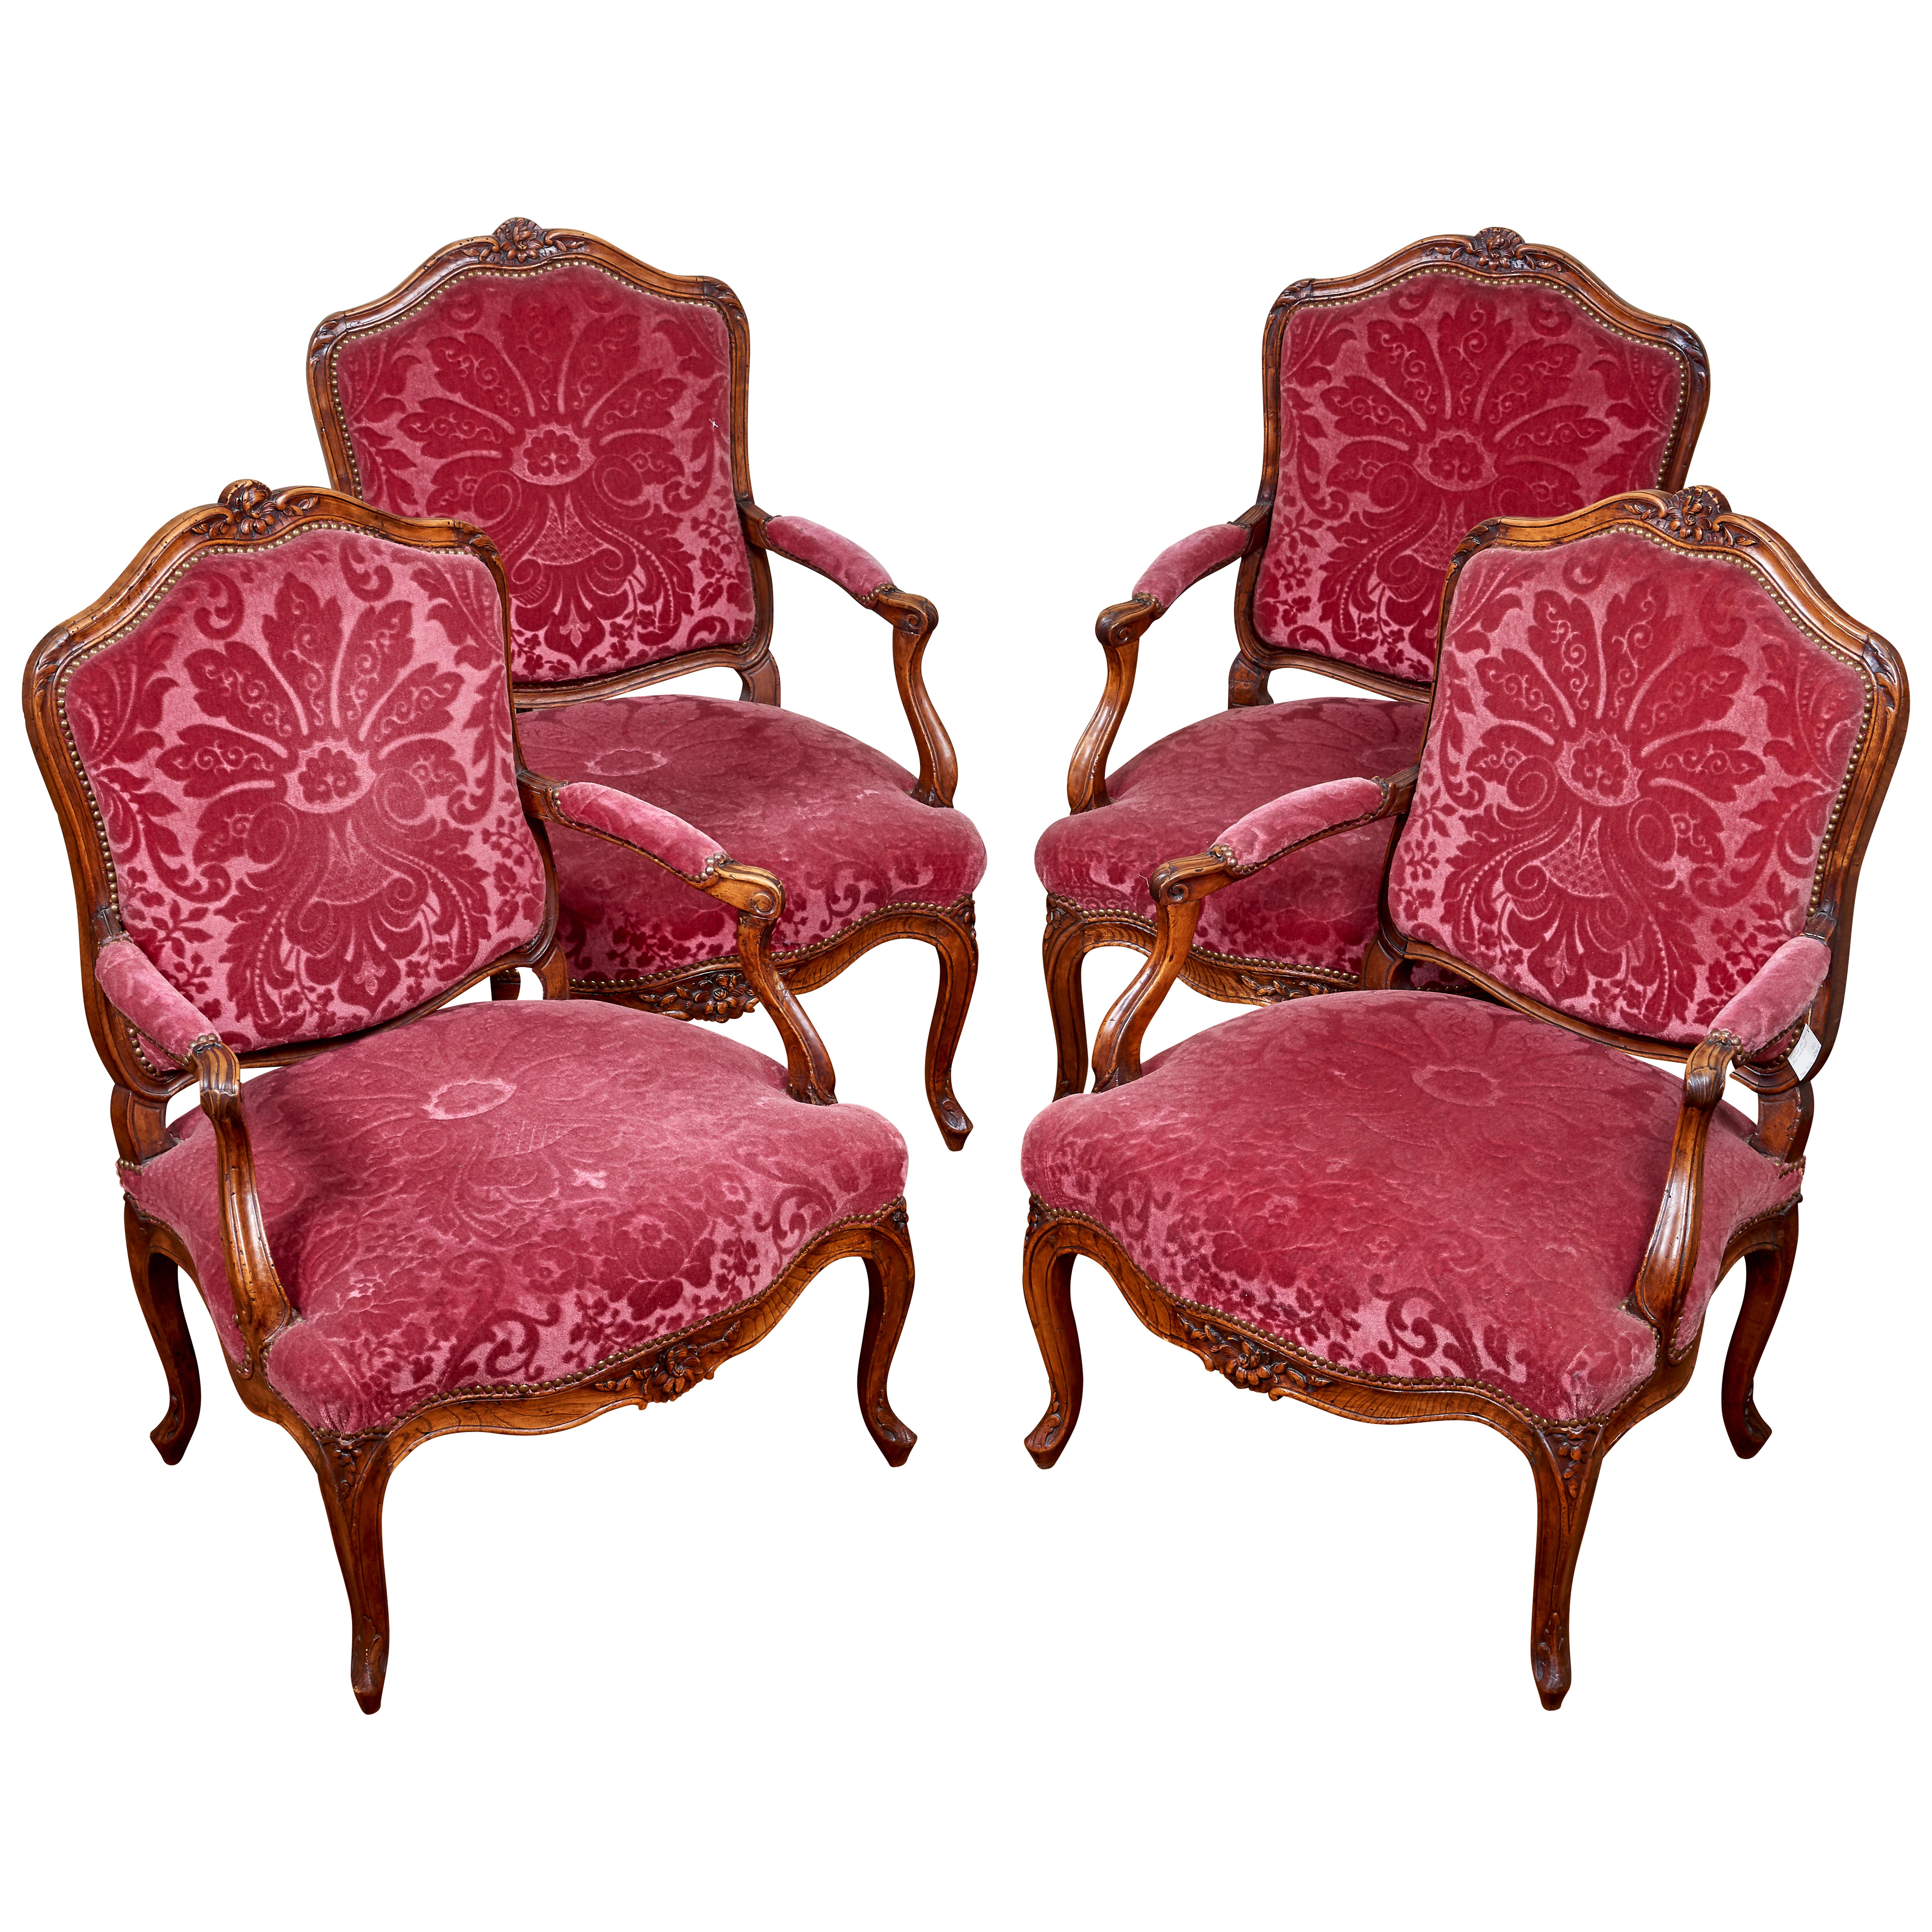 Four armchairs in natural wood and old pink damask cotton velvet. Typical work in taste of Nogaret.
Made in France probably in Lyon, circa 1750-1760.
   